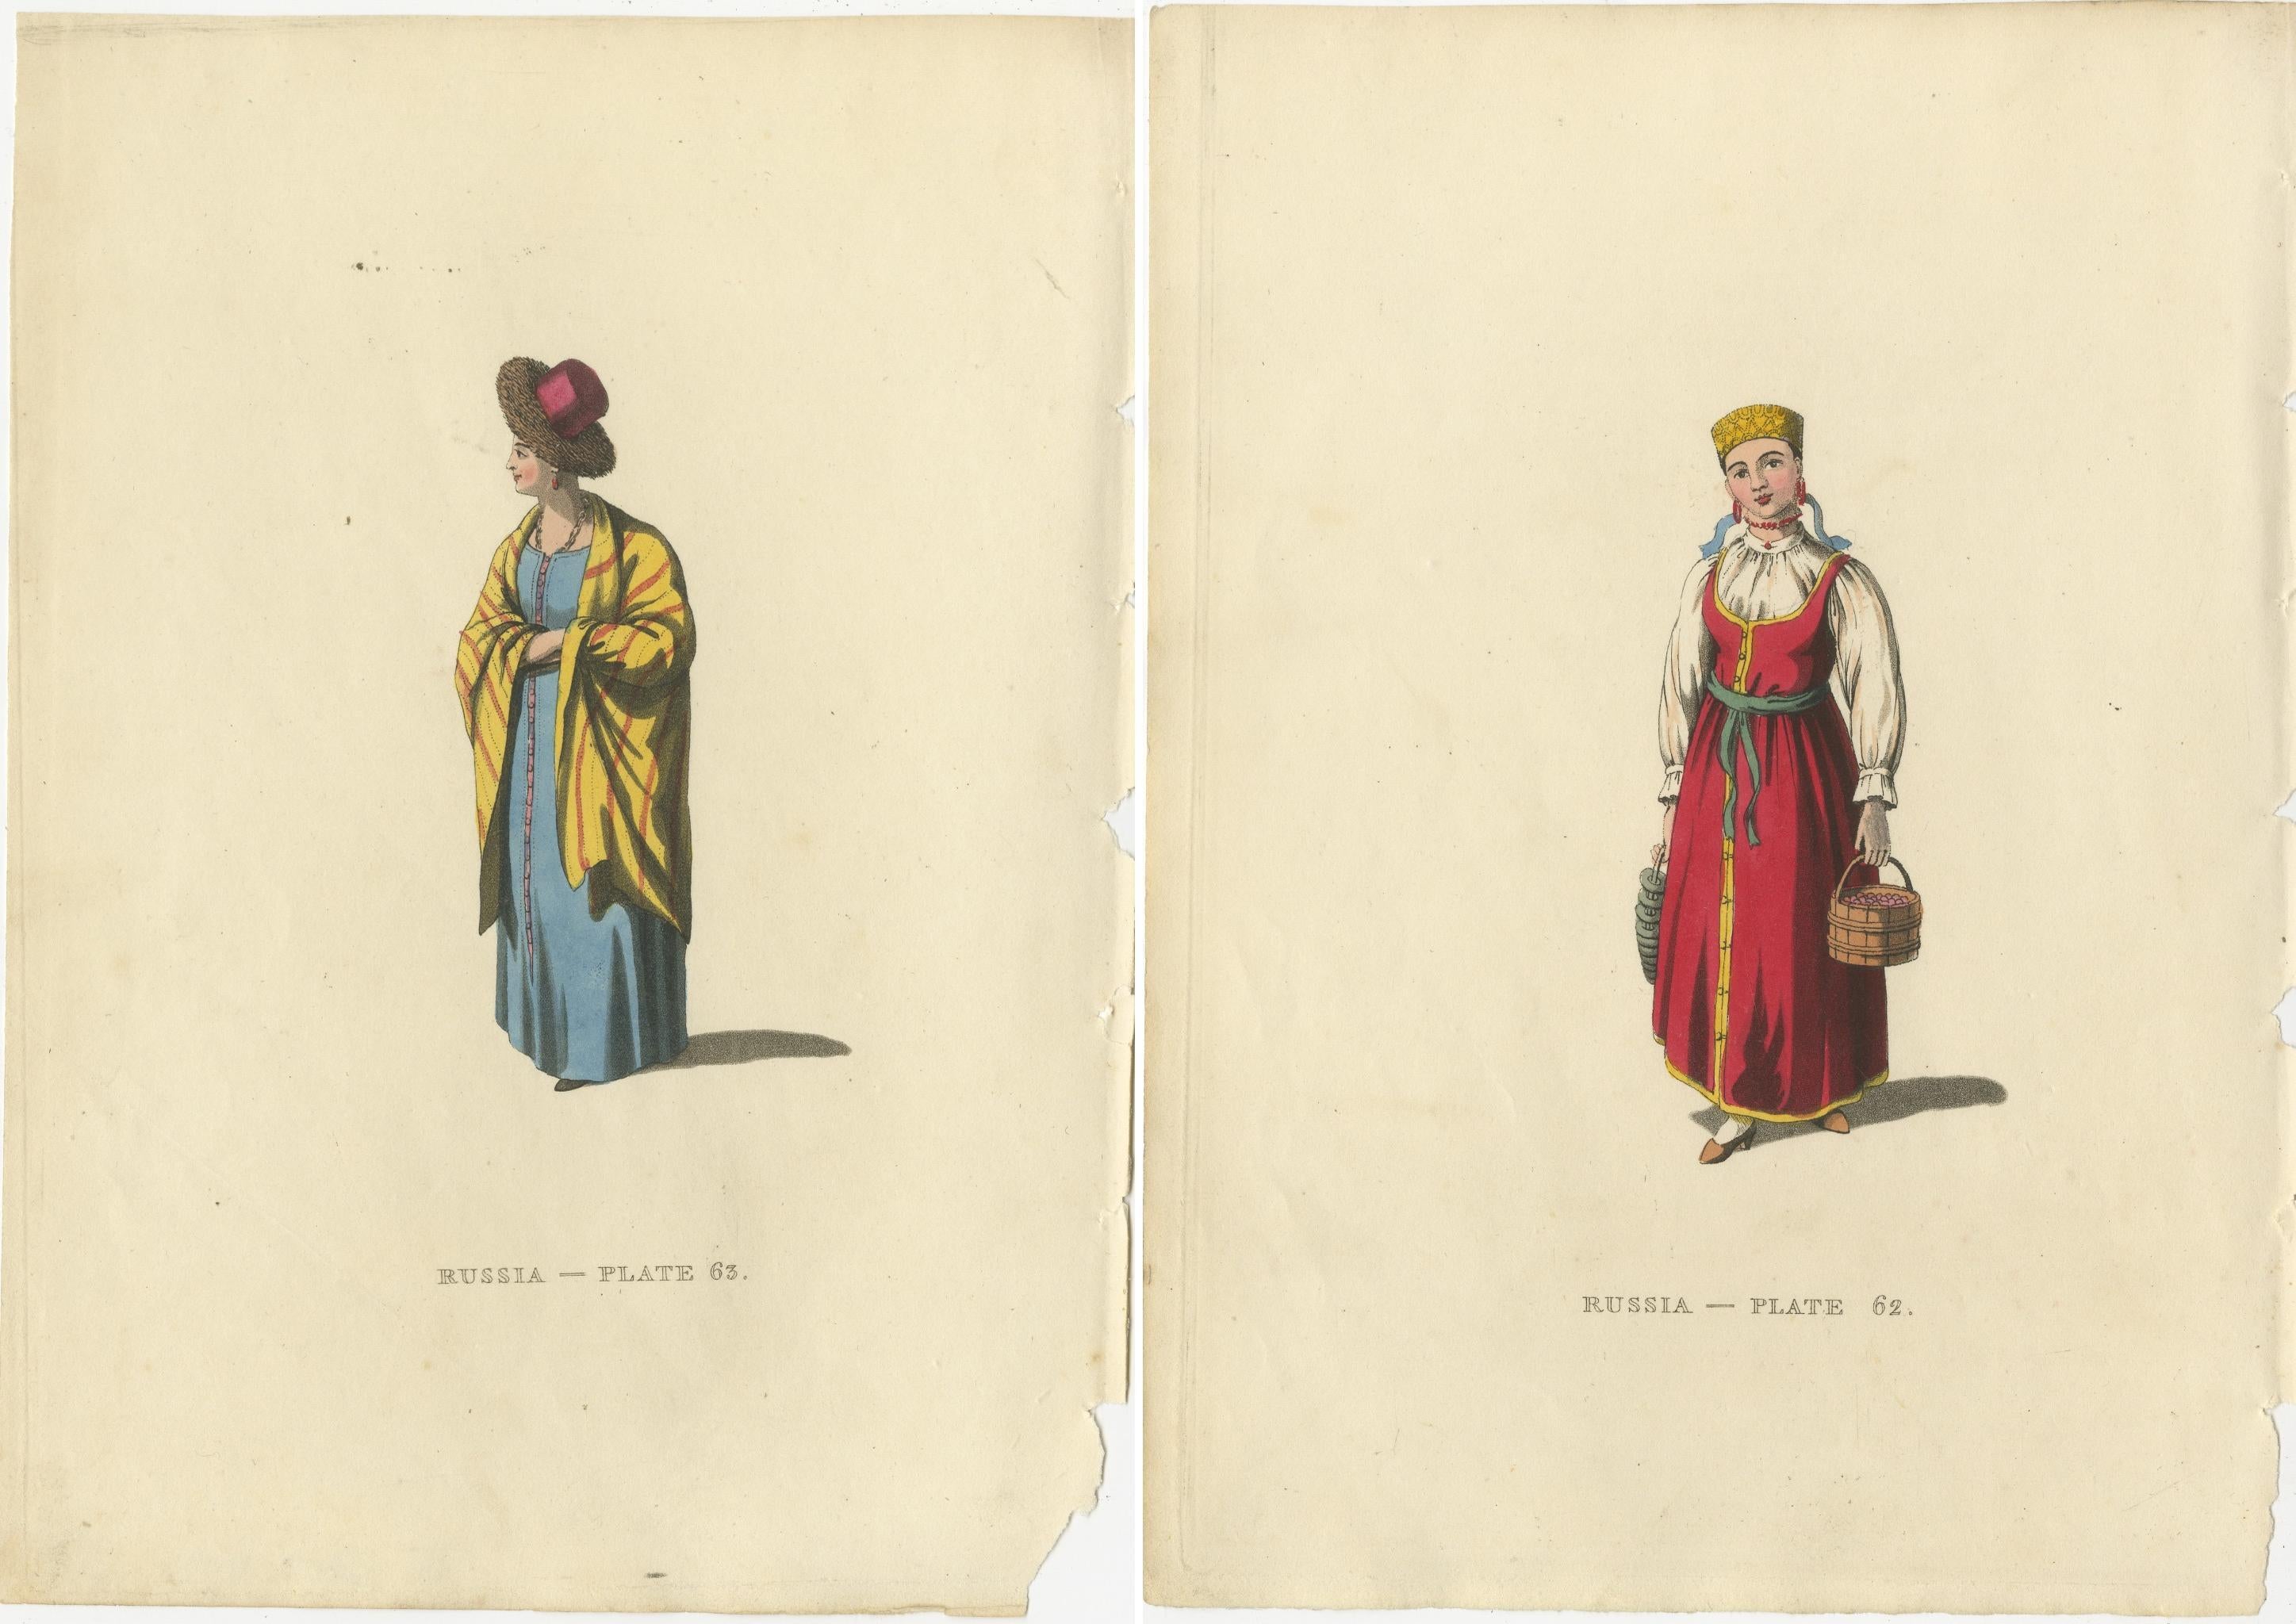 The images are hand-colored engravings from an early 19th-century publication that offers a visual representation of the traditional dress and customs of the Russian people. They are from 